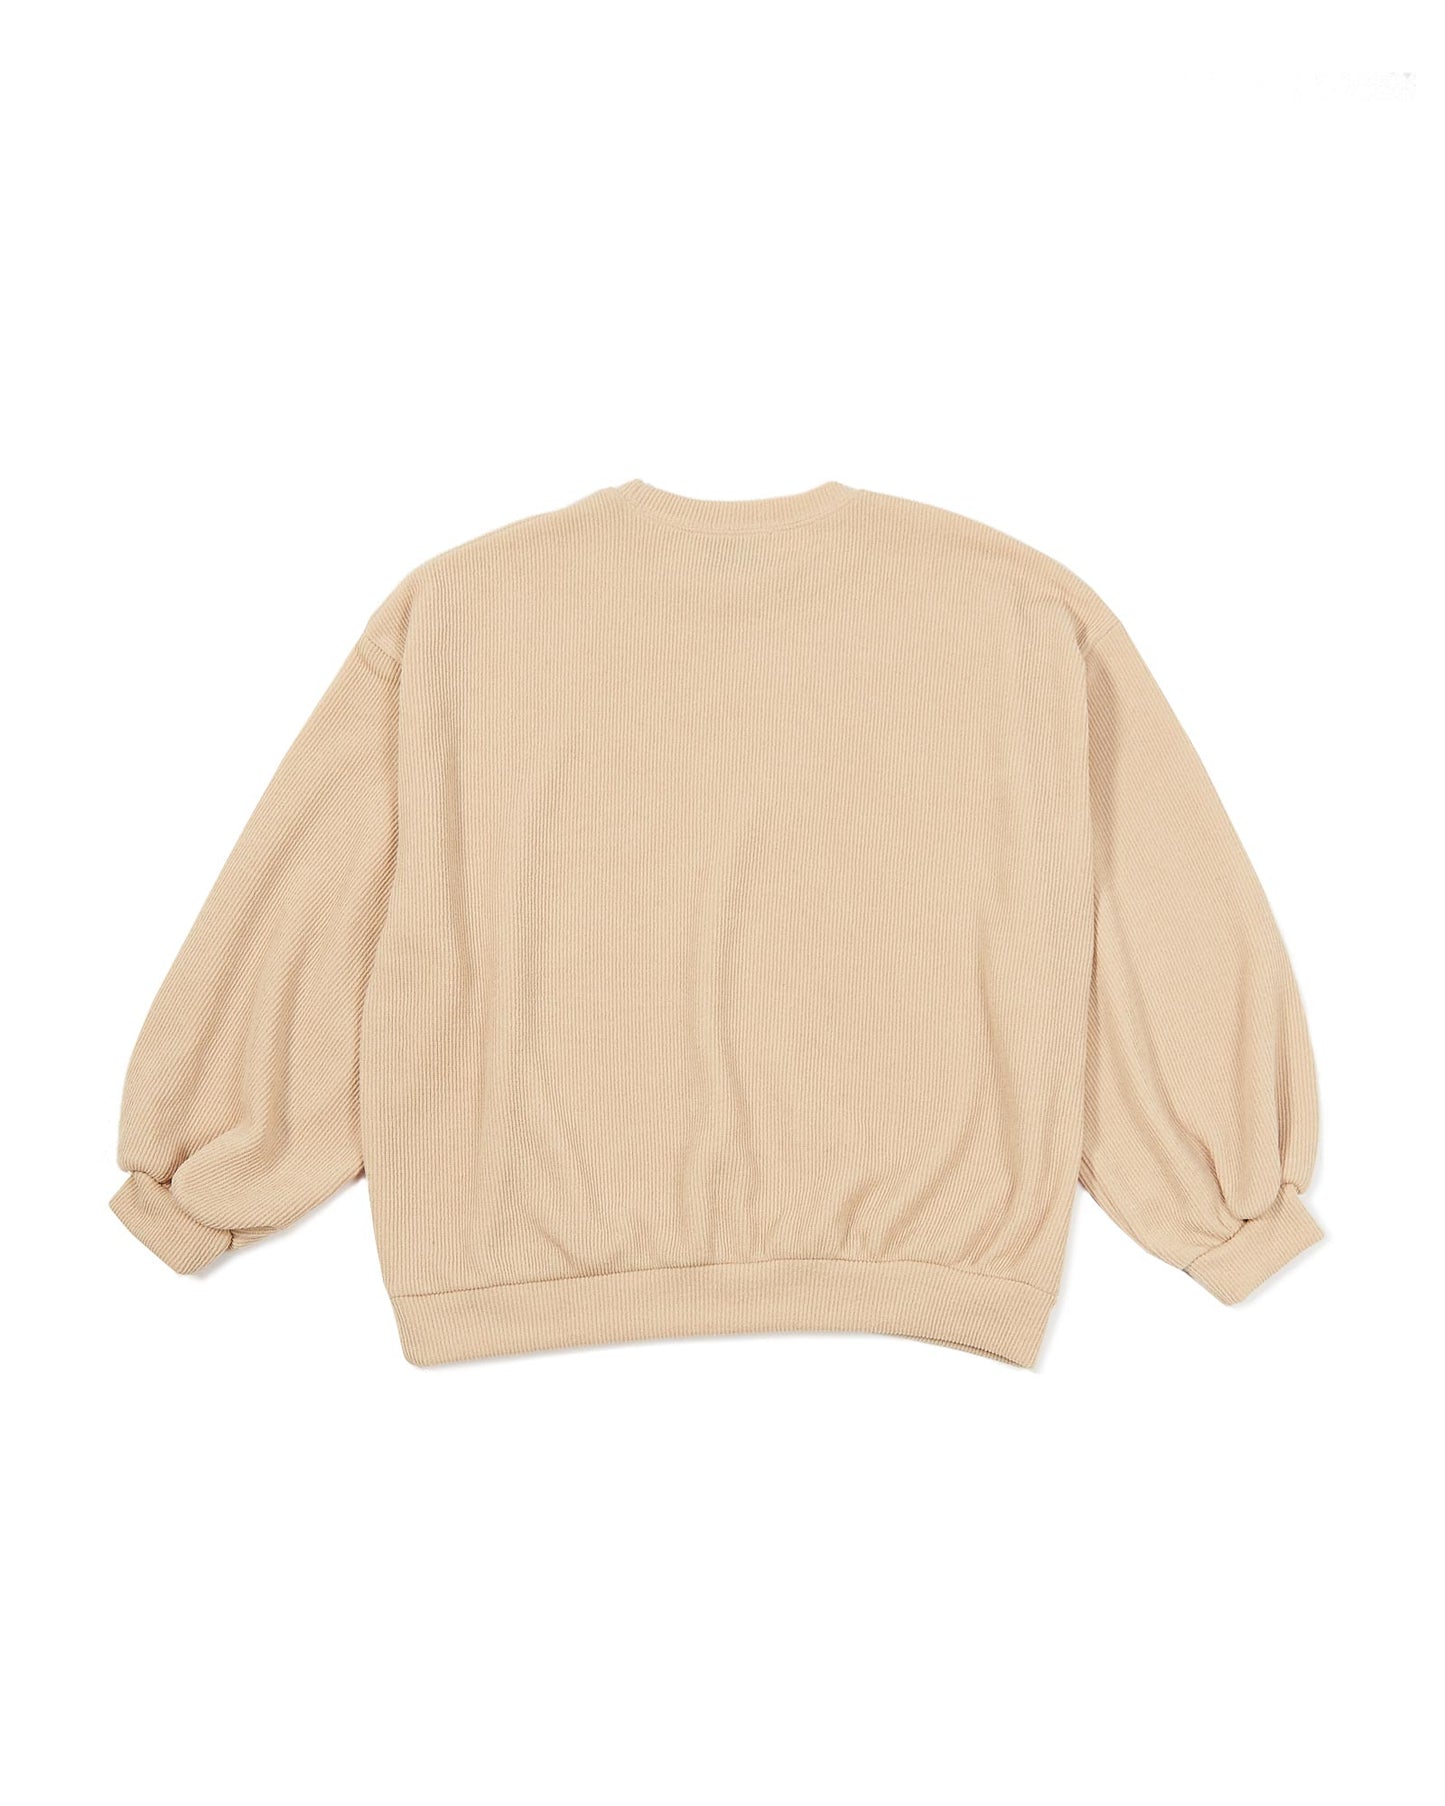 Load image into Gallery viewer, Puffed Long Sleeve Oversized Knit Top - Black - Cream
